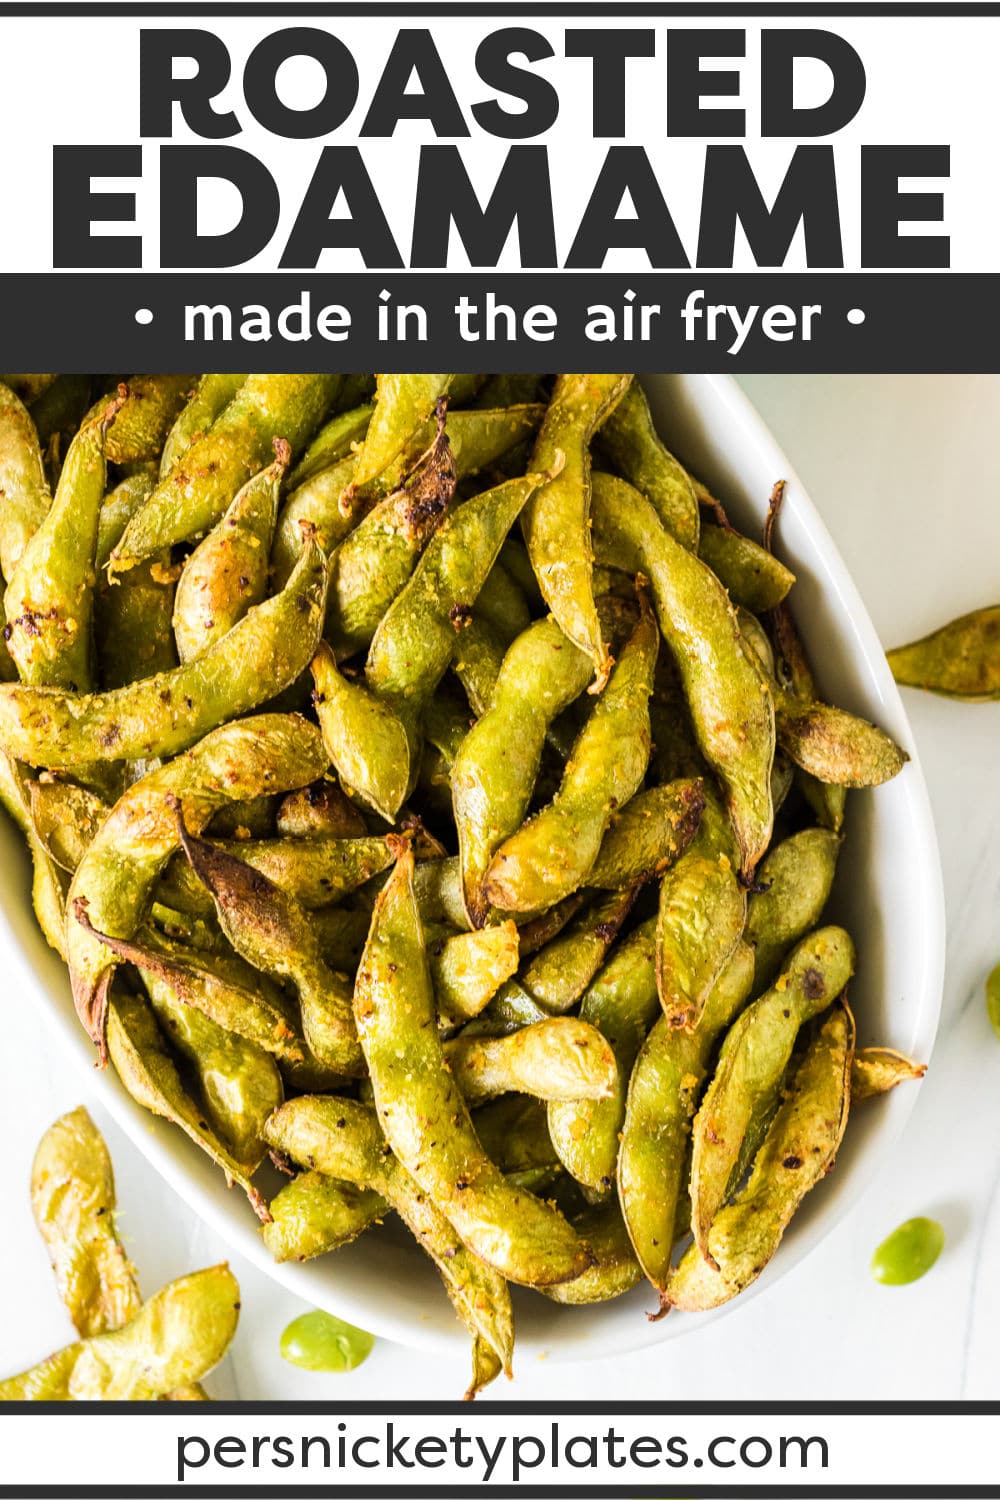 Easy air fryer edamame makes a simple snack or appetizer. Made in just 15 minutes from fresh or frozen edamame, this side dish can be seasoned any way you like. | www.persnicketyplates.com